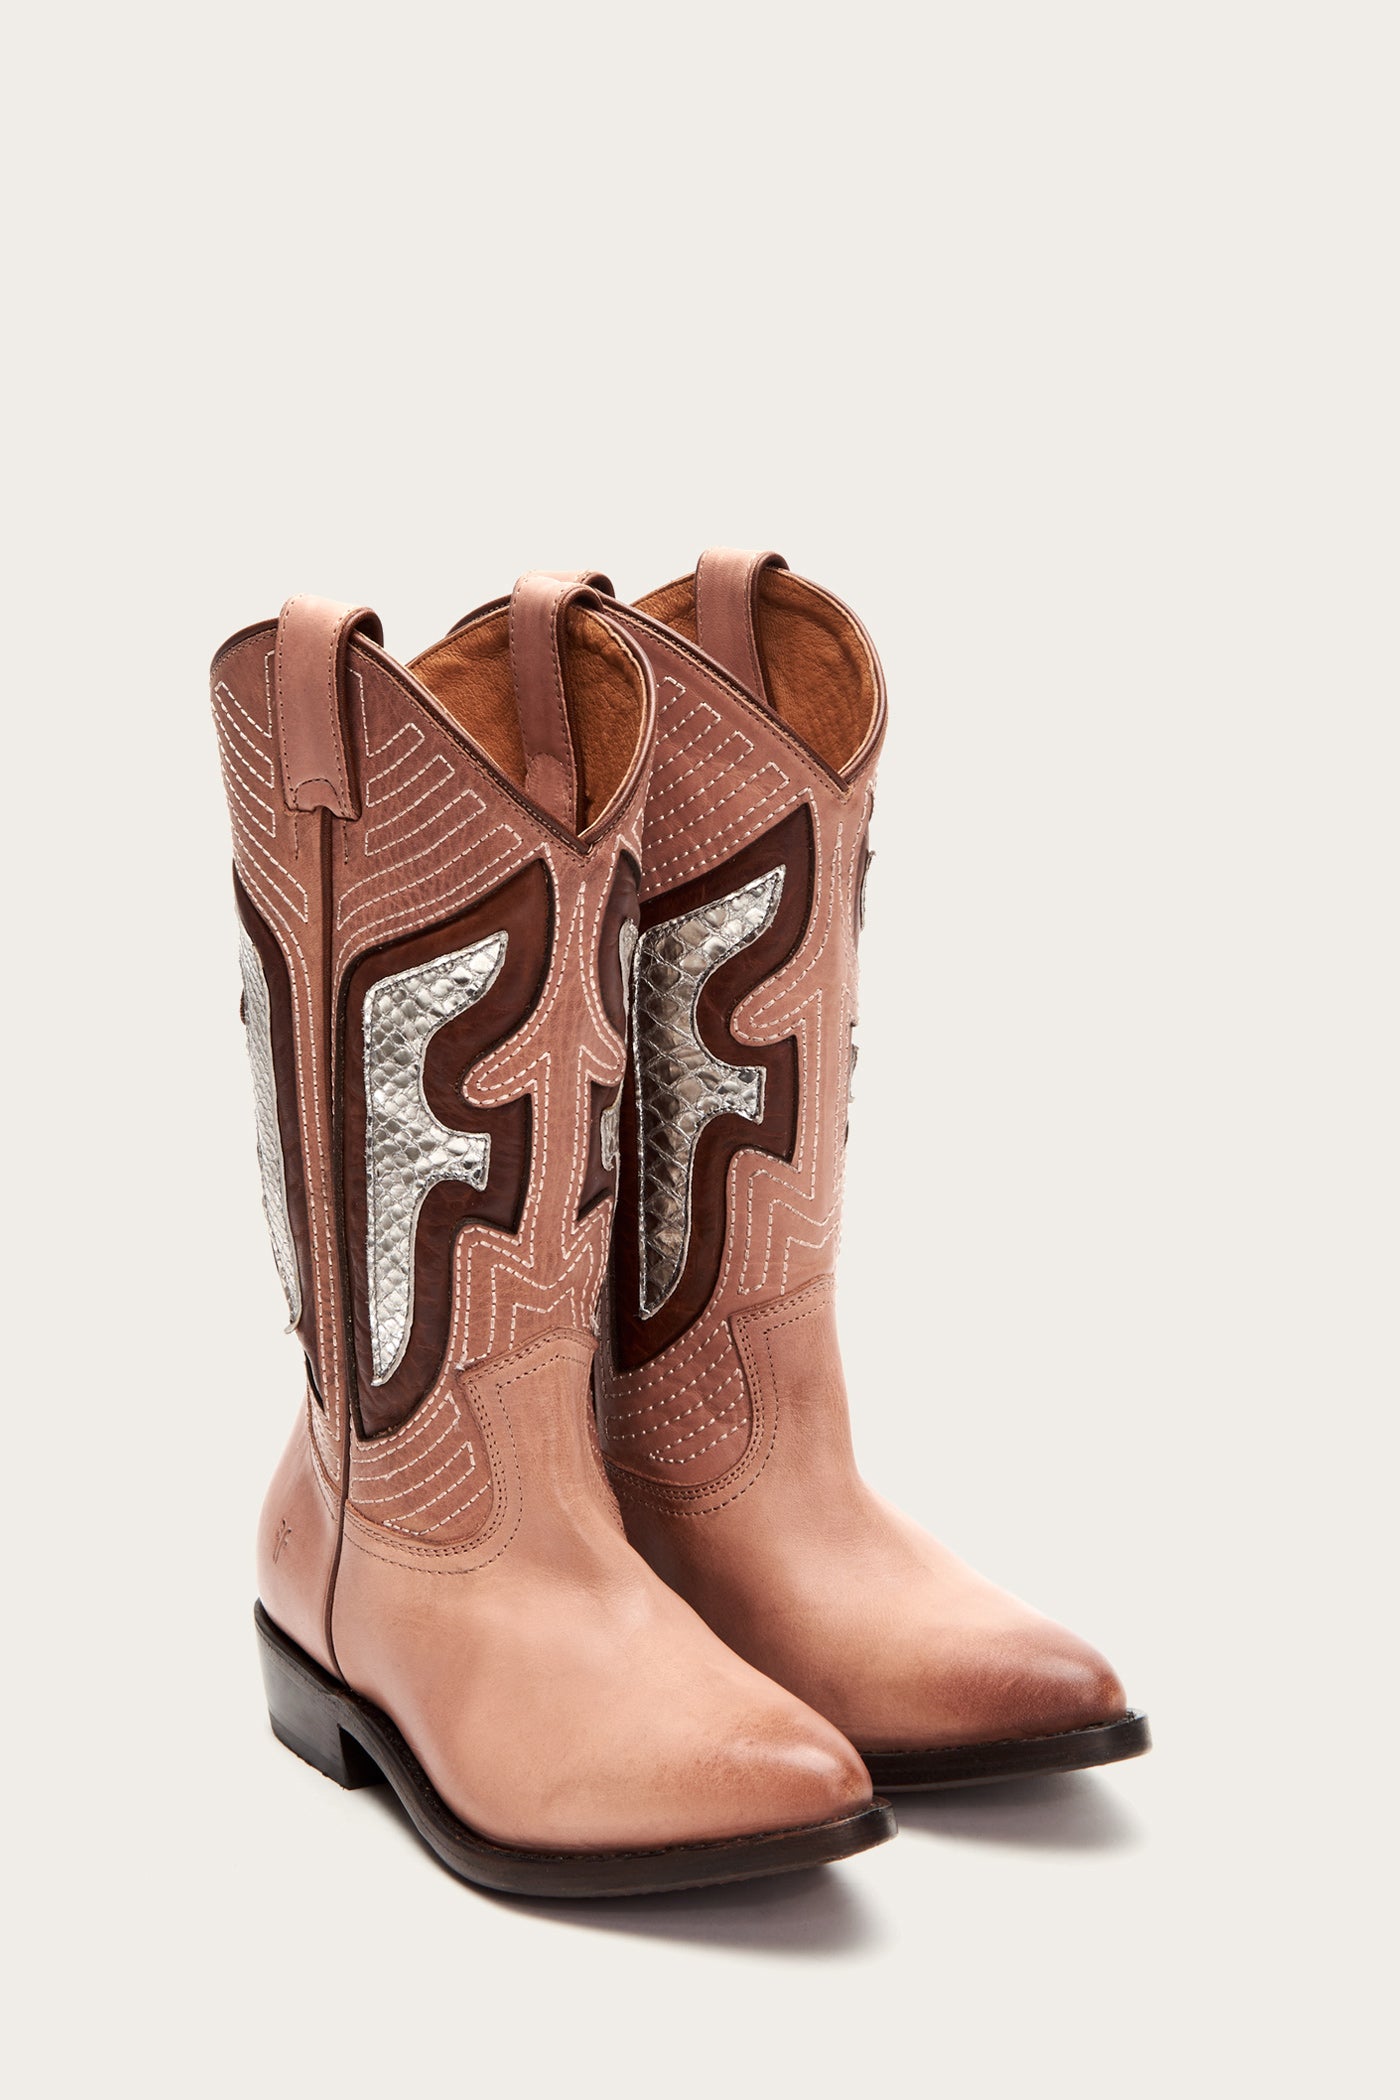 dusty rose cowboy boots